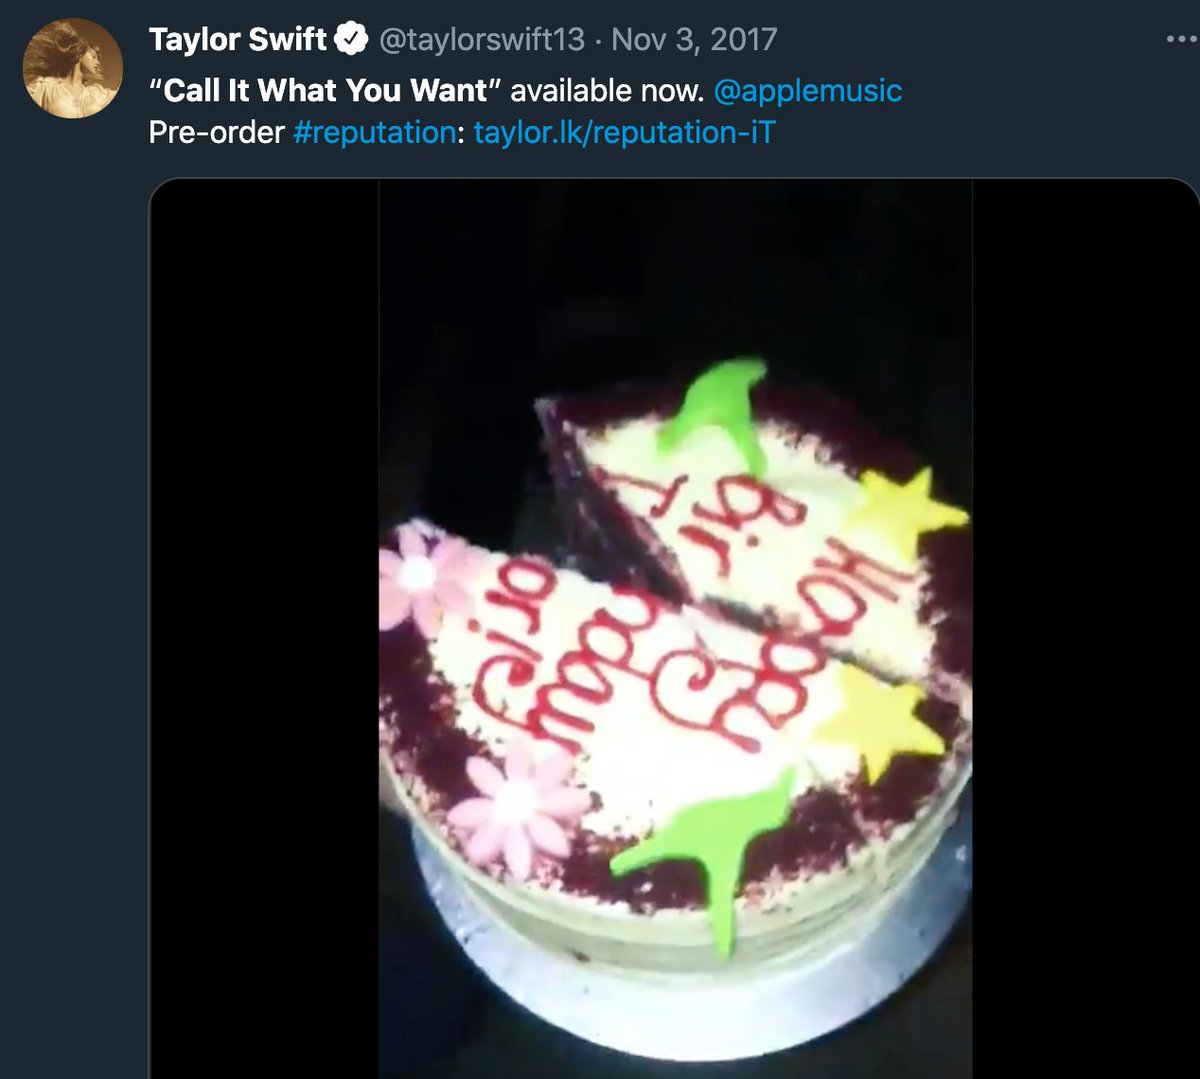 13 december 2016: taylor spends her 27th birthday in london, and we know this because she later posts a video of her cake, which was from a london bakery.